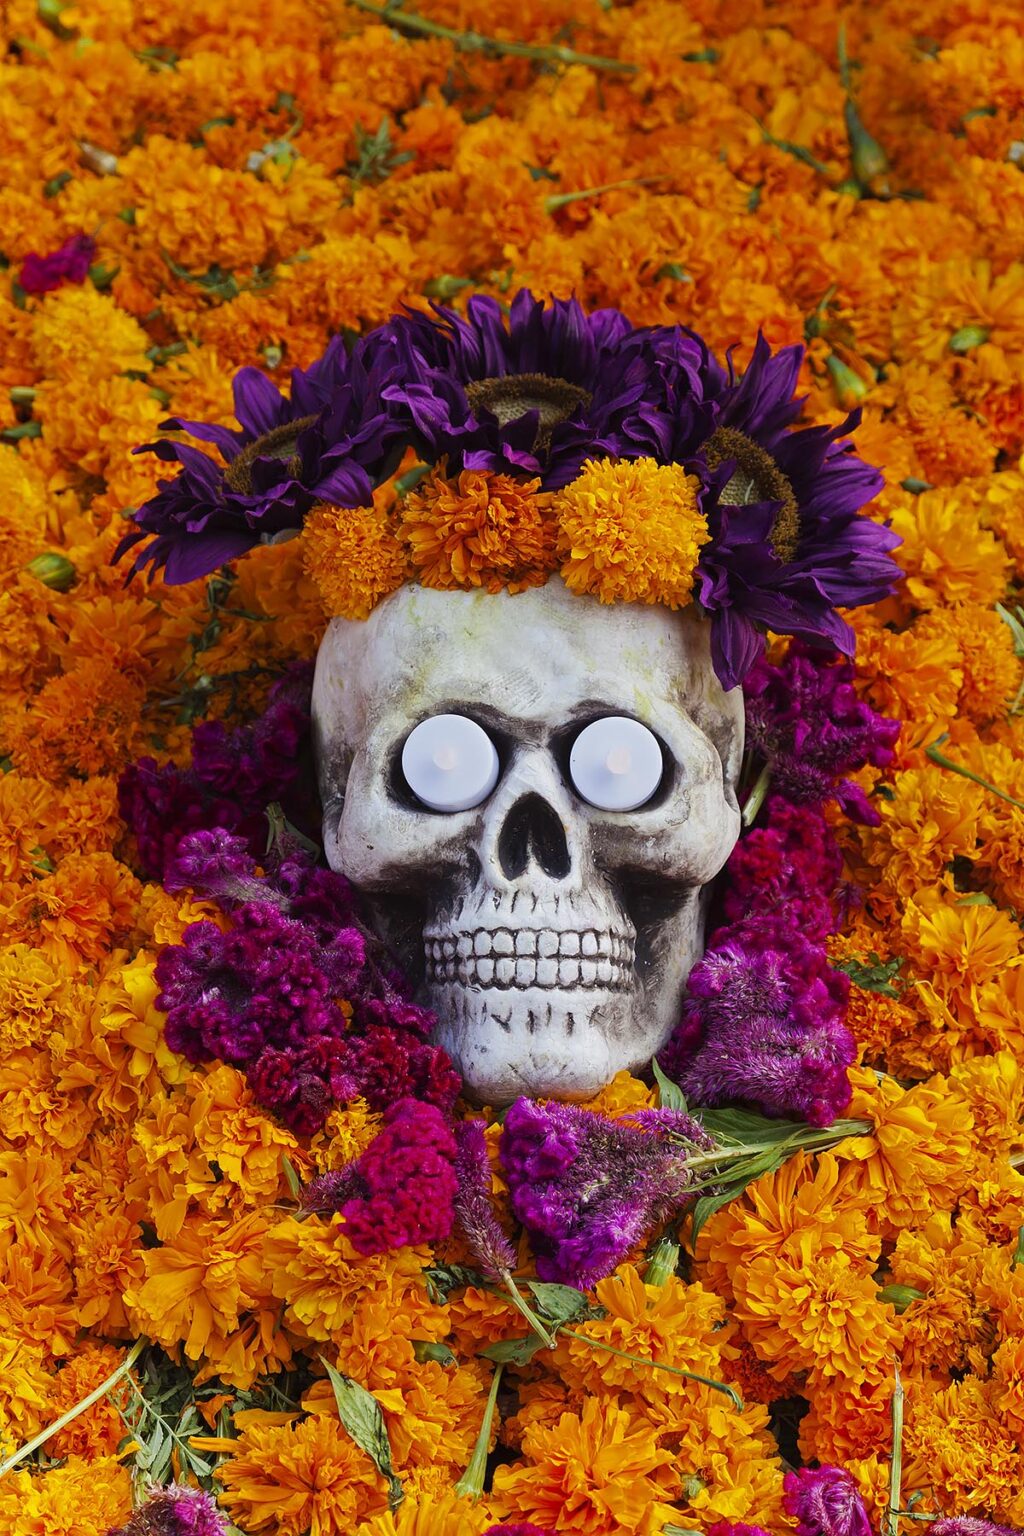 An SKULL ALTAR set up in the JARDIN to honor loved ones who have died during DAY OF THE DEAD -  SAN MIGUEL DE ALLENDE, MEXICO